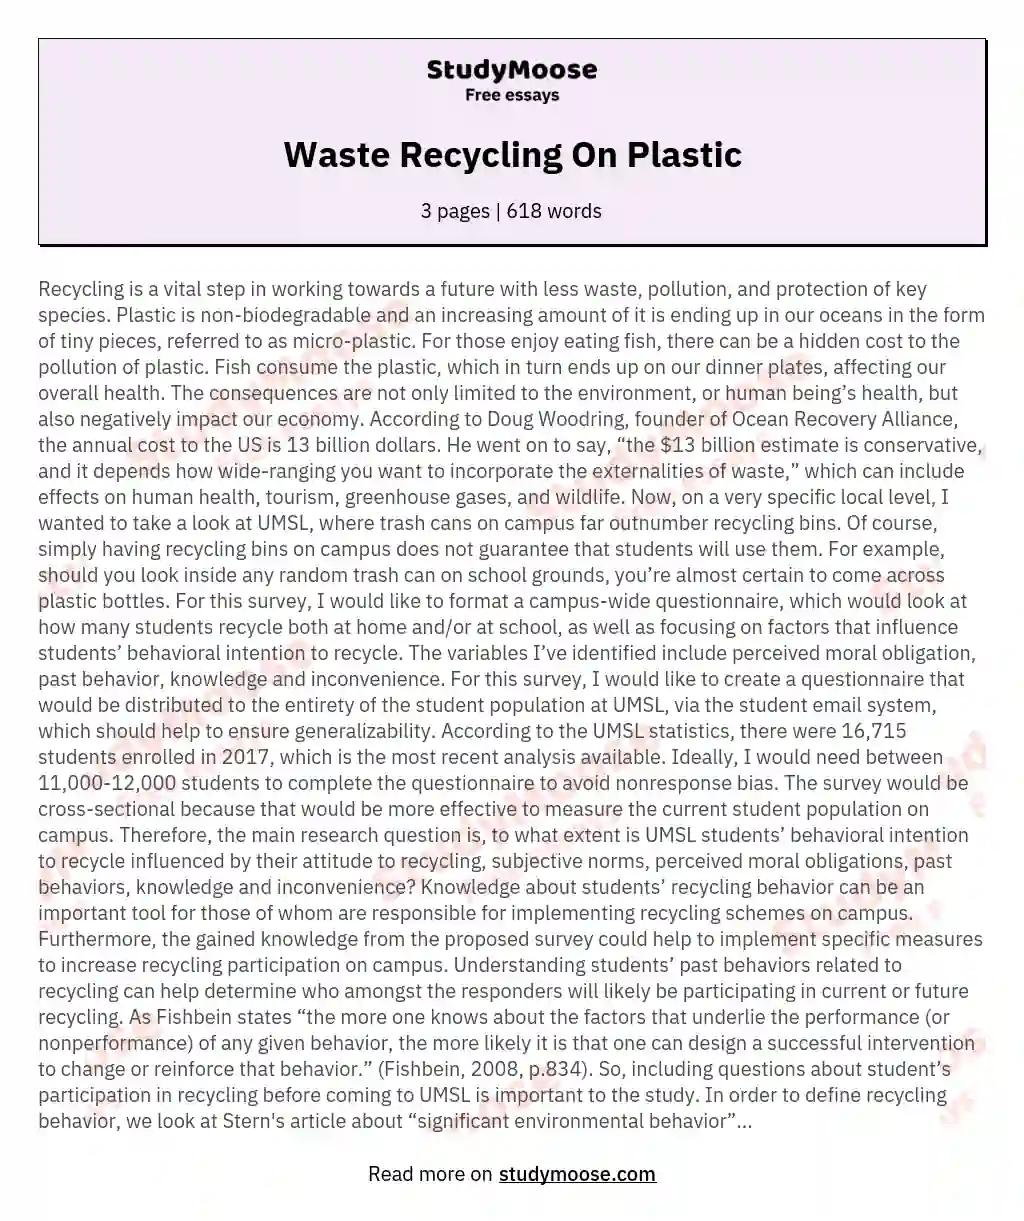 Waste Recycling On Plastic essay